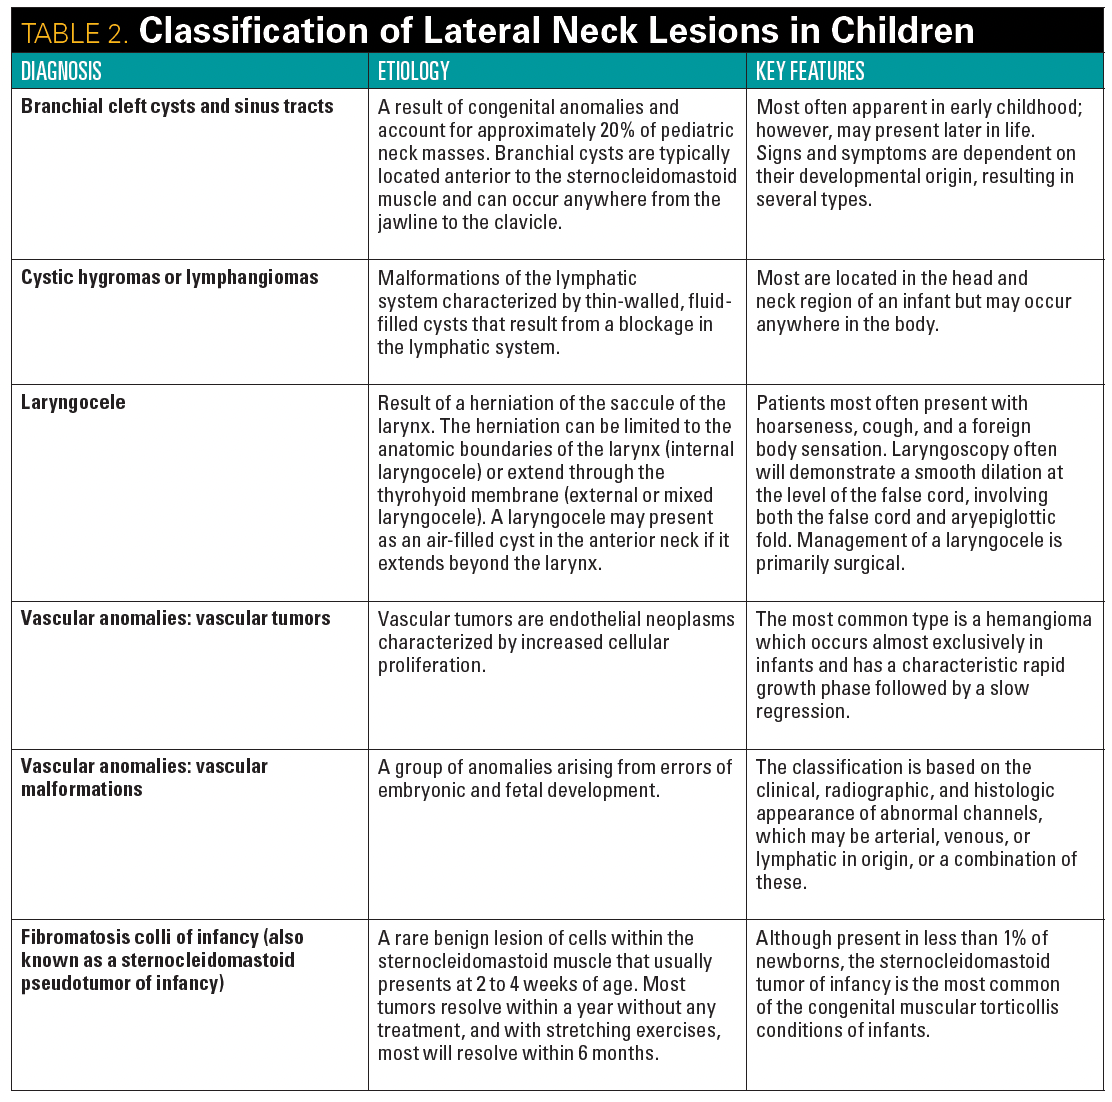 Table 2. Classification of Lateral Neck Lesions in Children